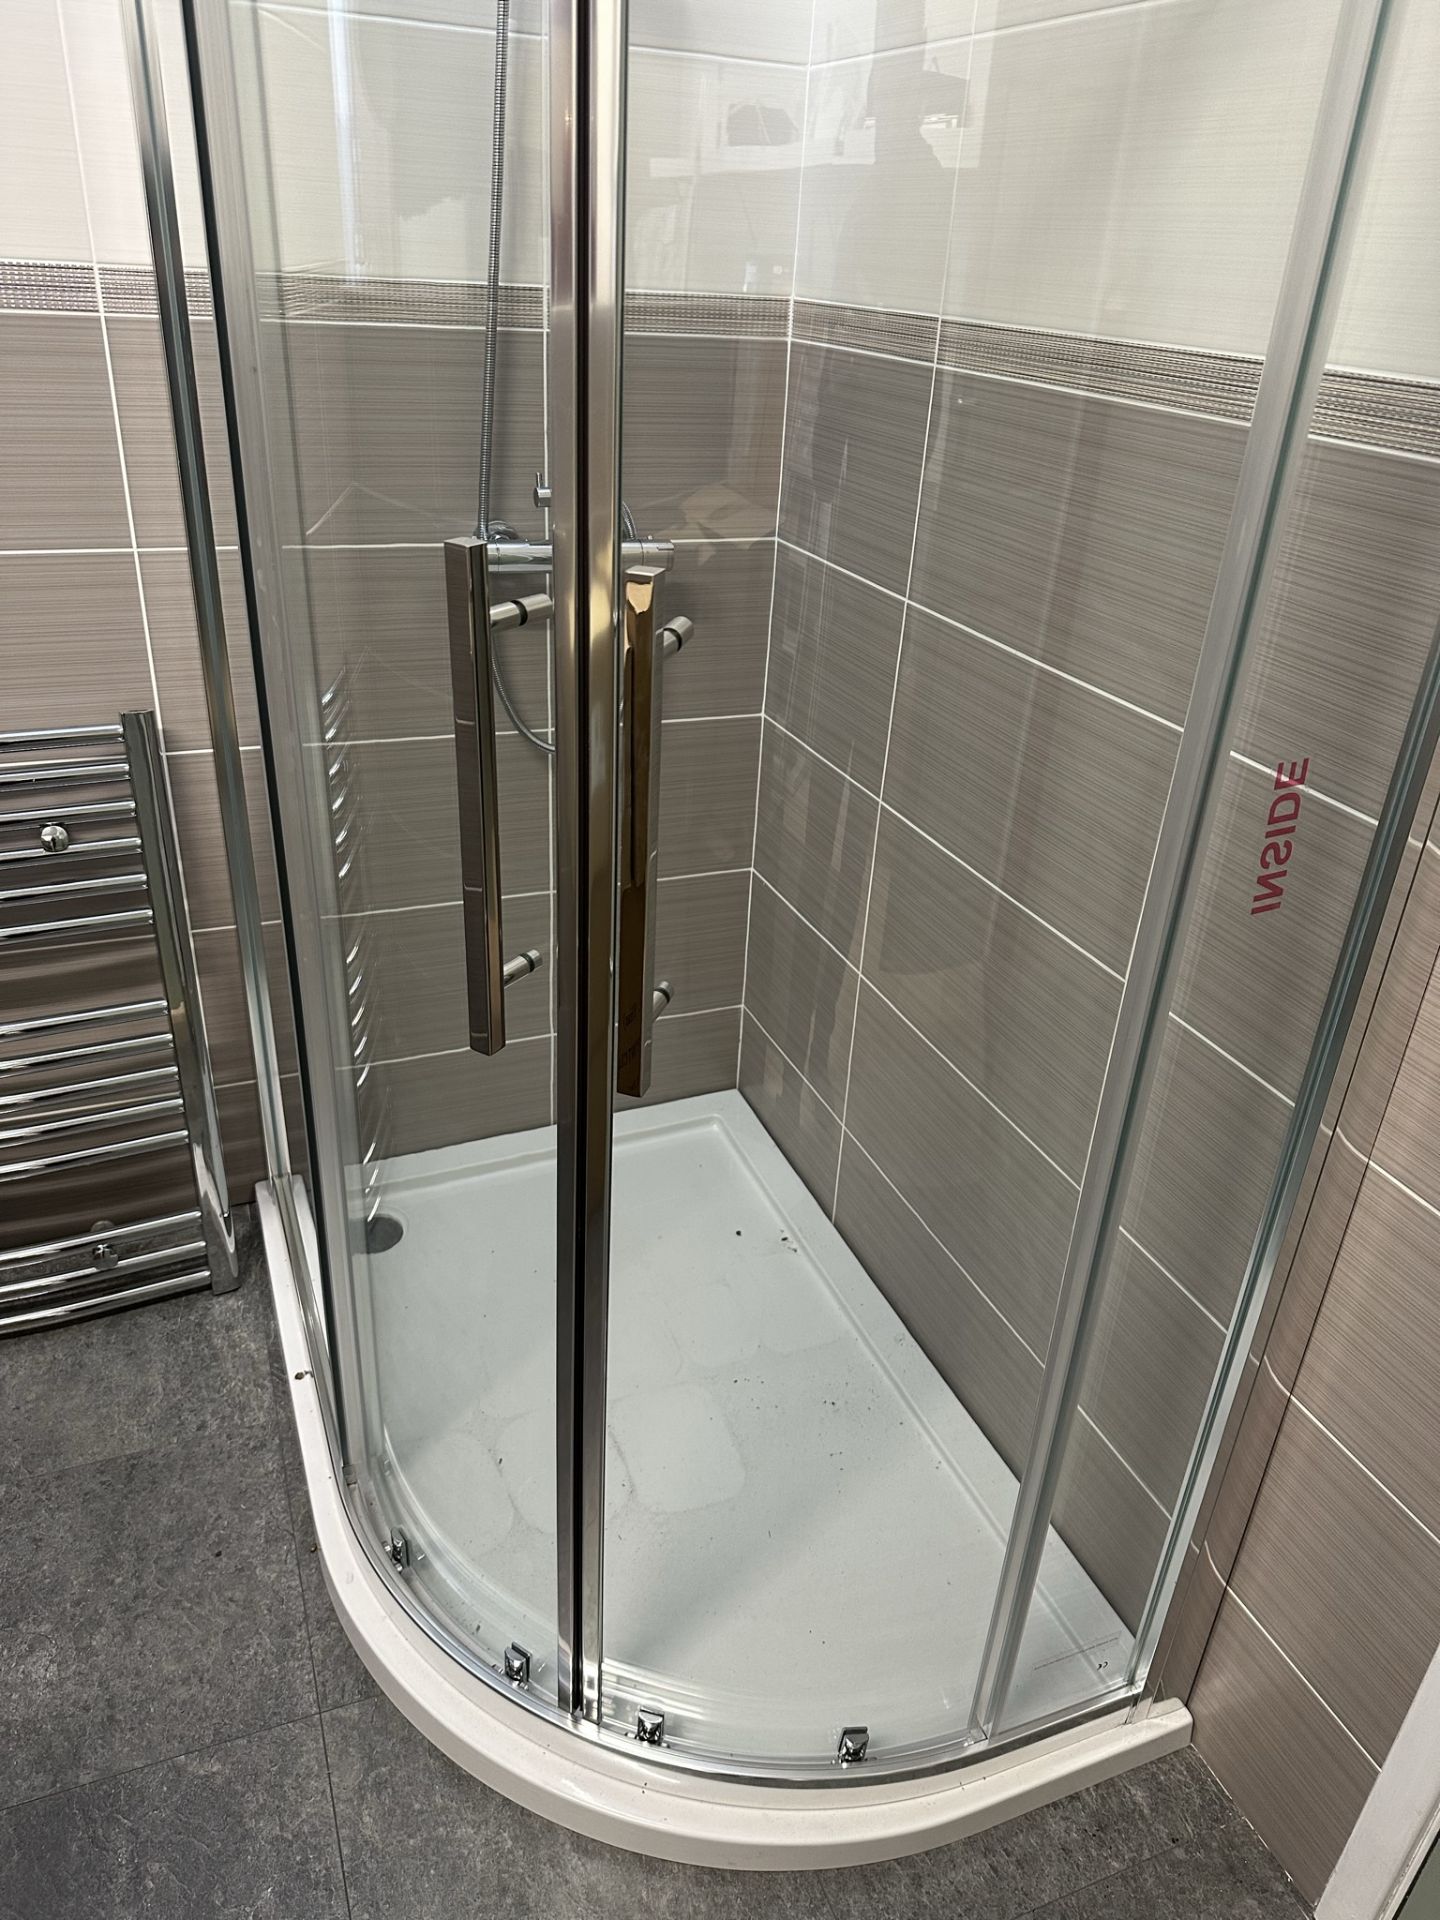 Ex Display Shower Enclosure, Fittings & Towel Rad - As Pictured - Image 5 of 5